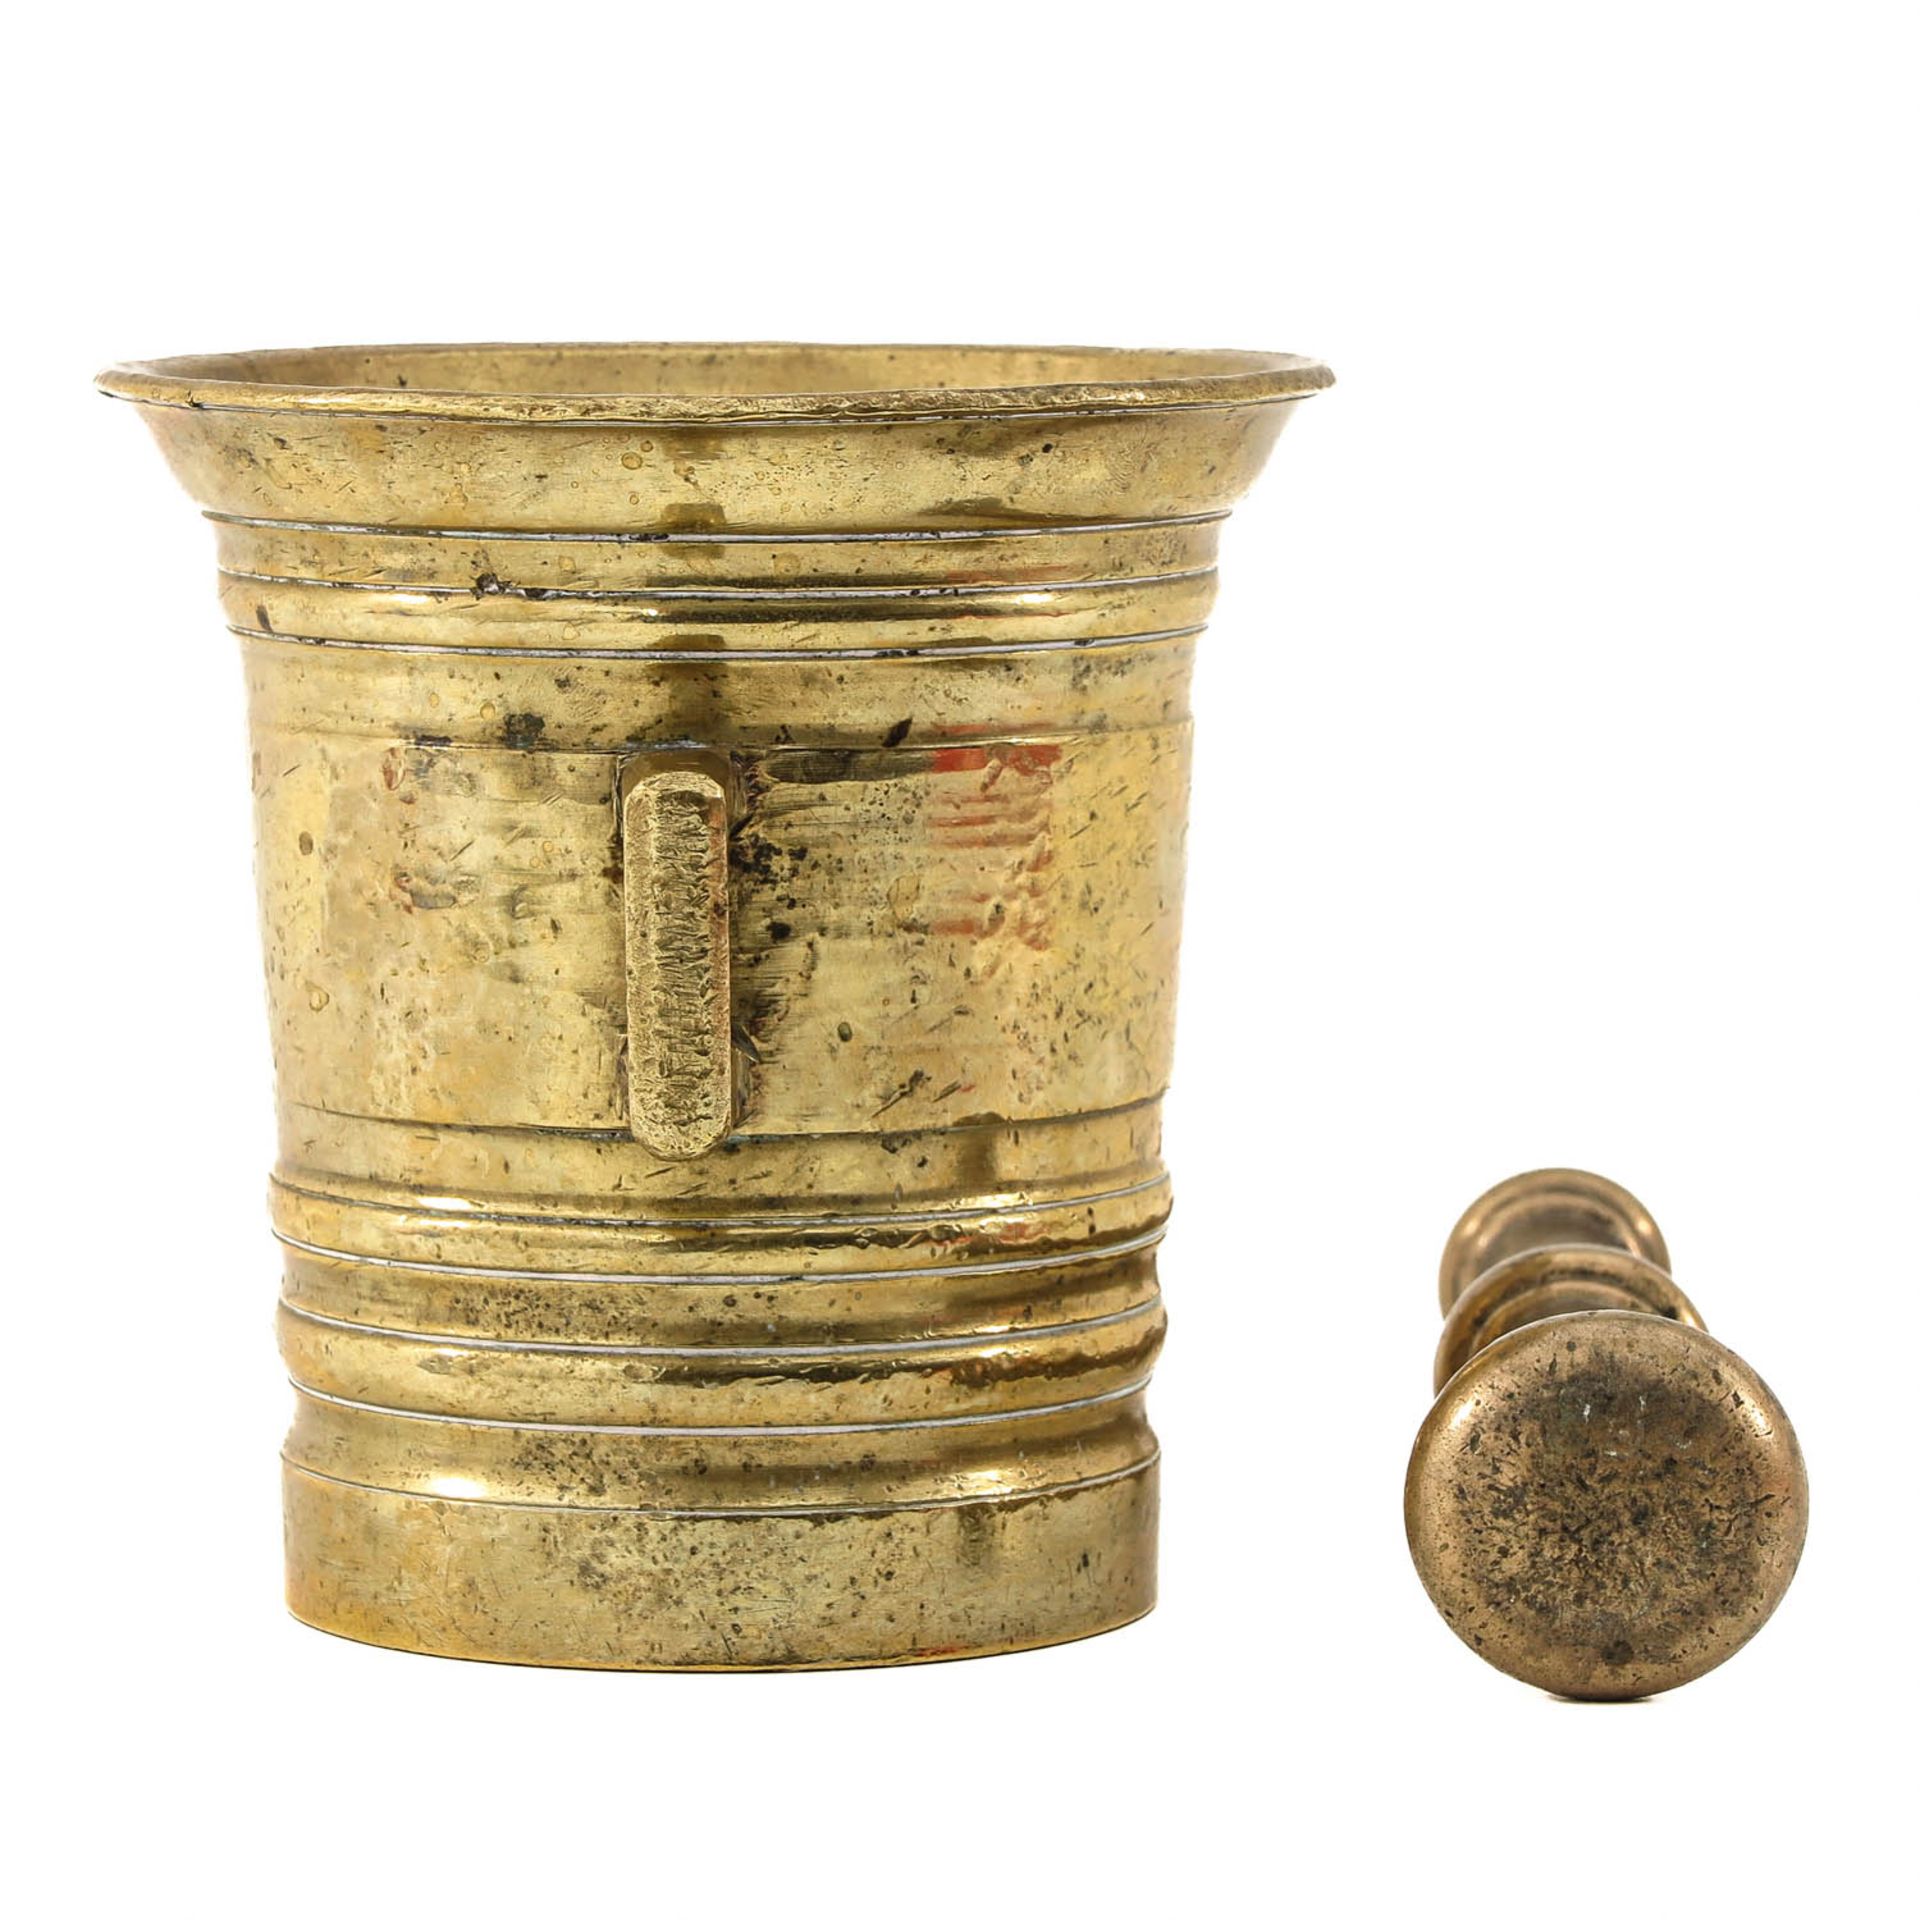 A 17th Century Mortar with Pestle - Image 4 of 8